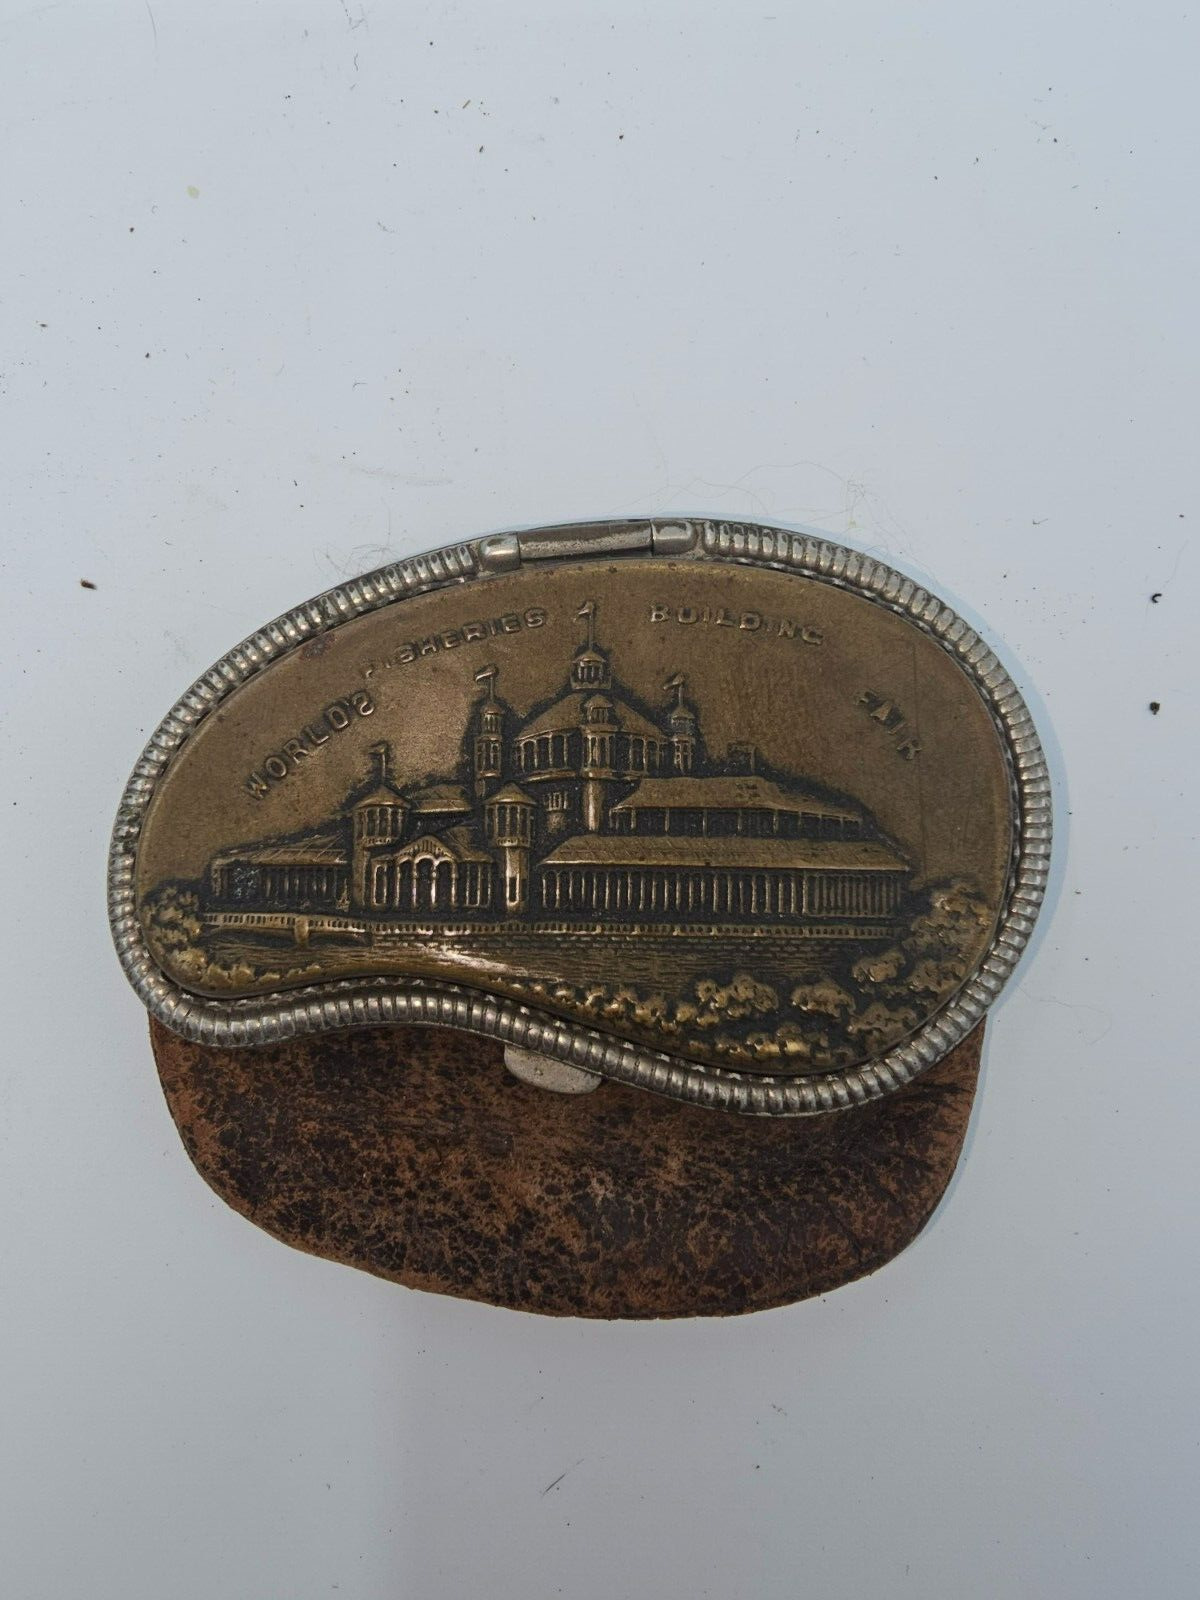 1893 COLUMBIAN EXPOSITION World's Fair Fisheries BUILDING Coin purse 130 Years 